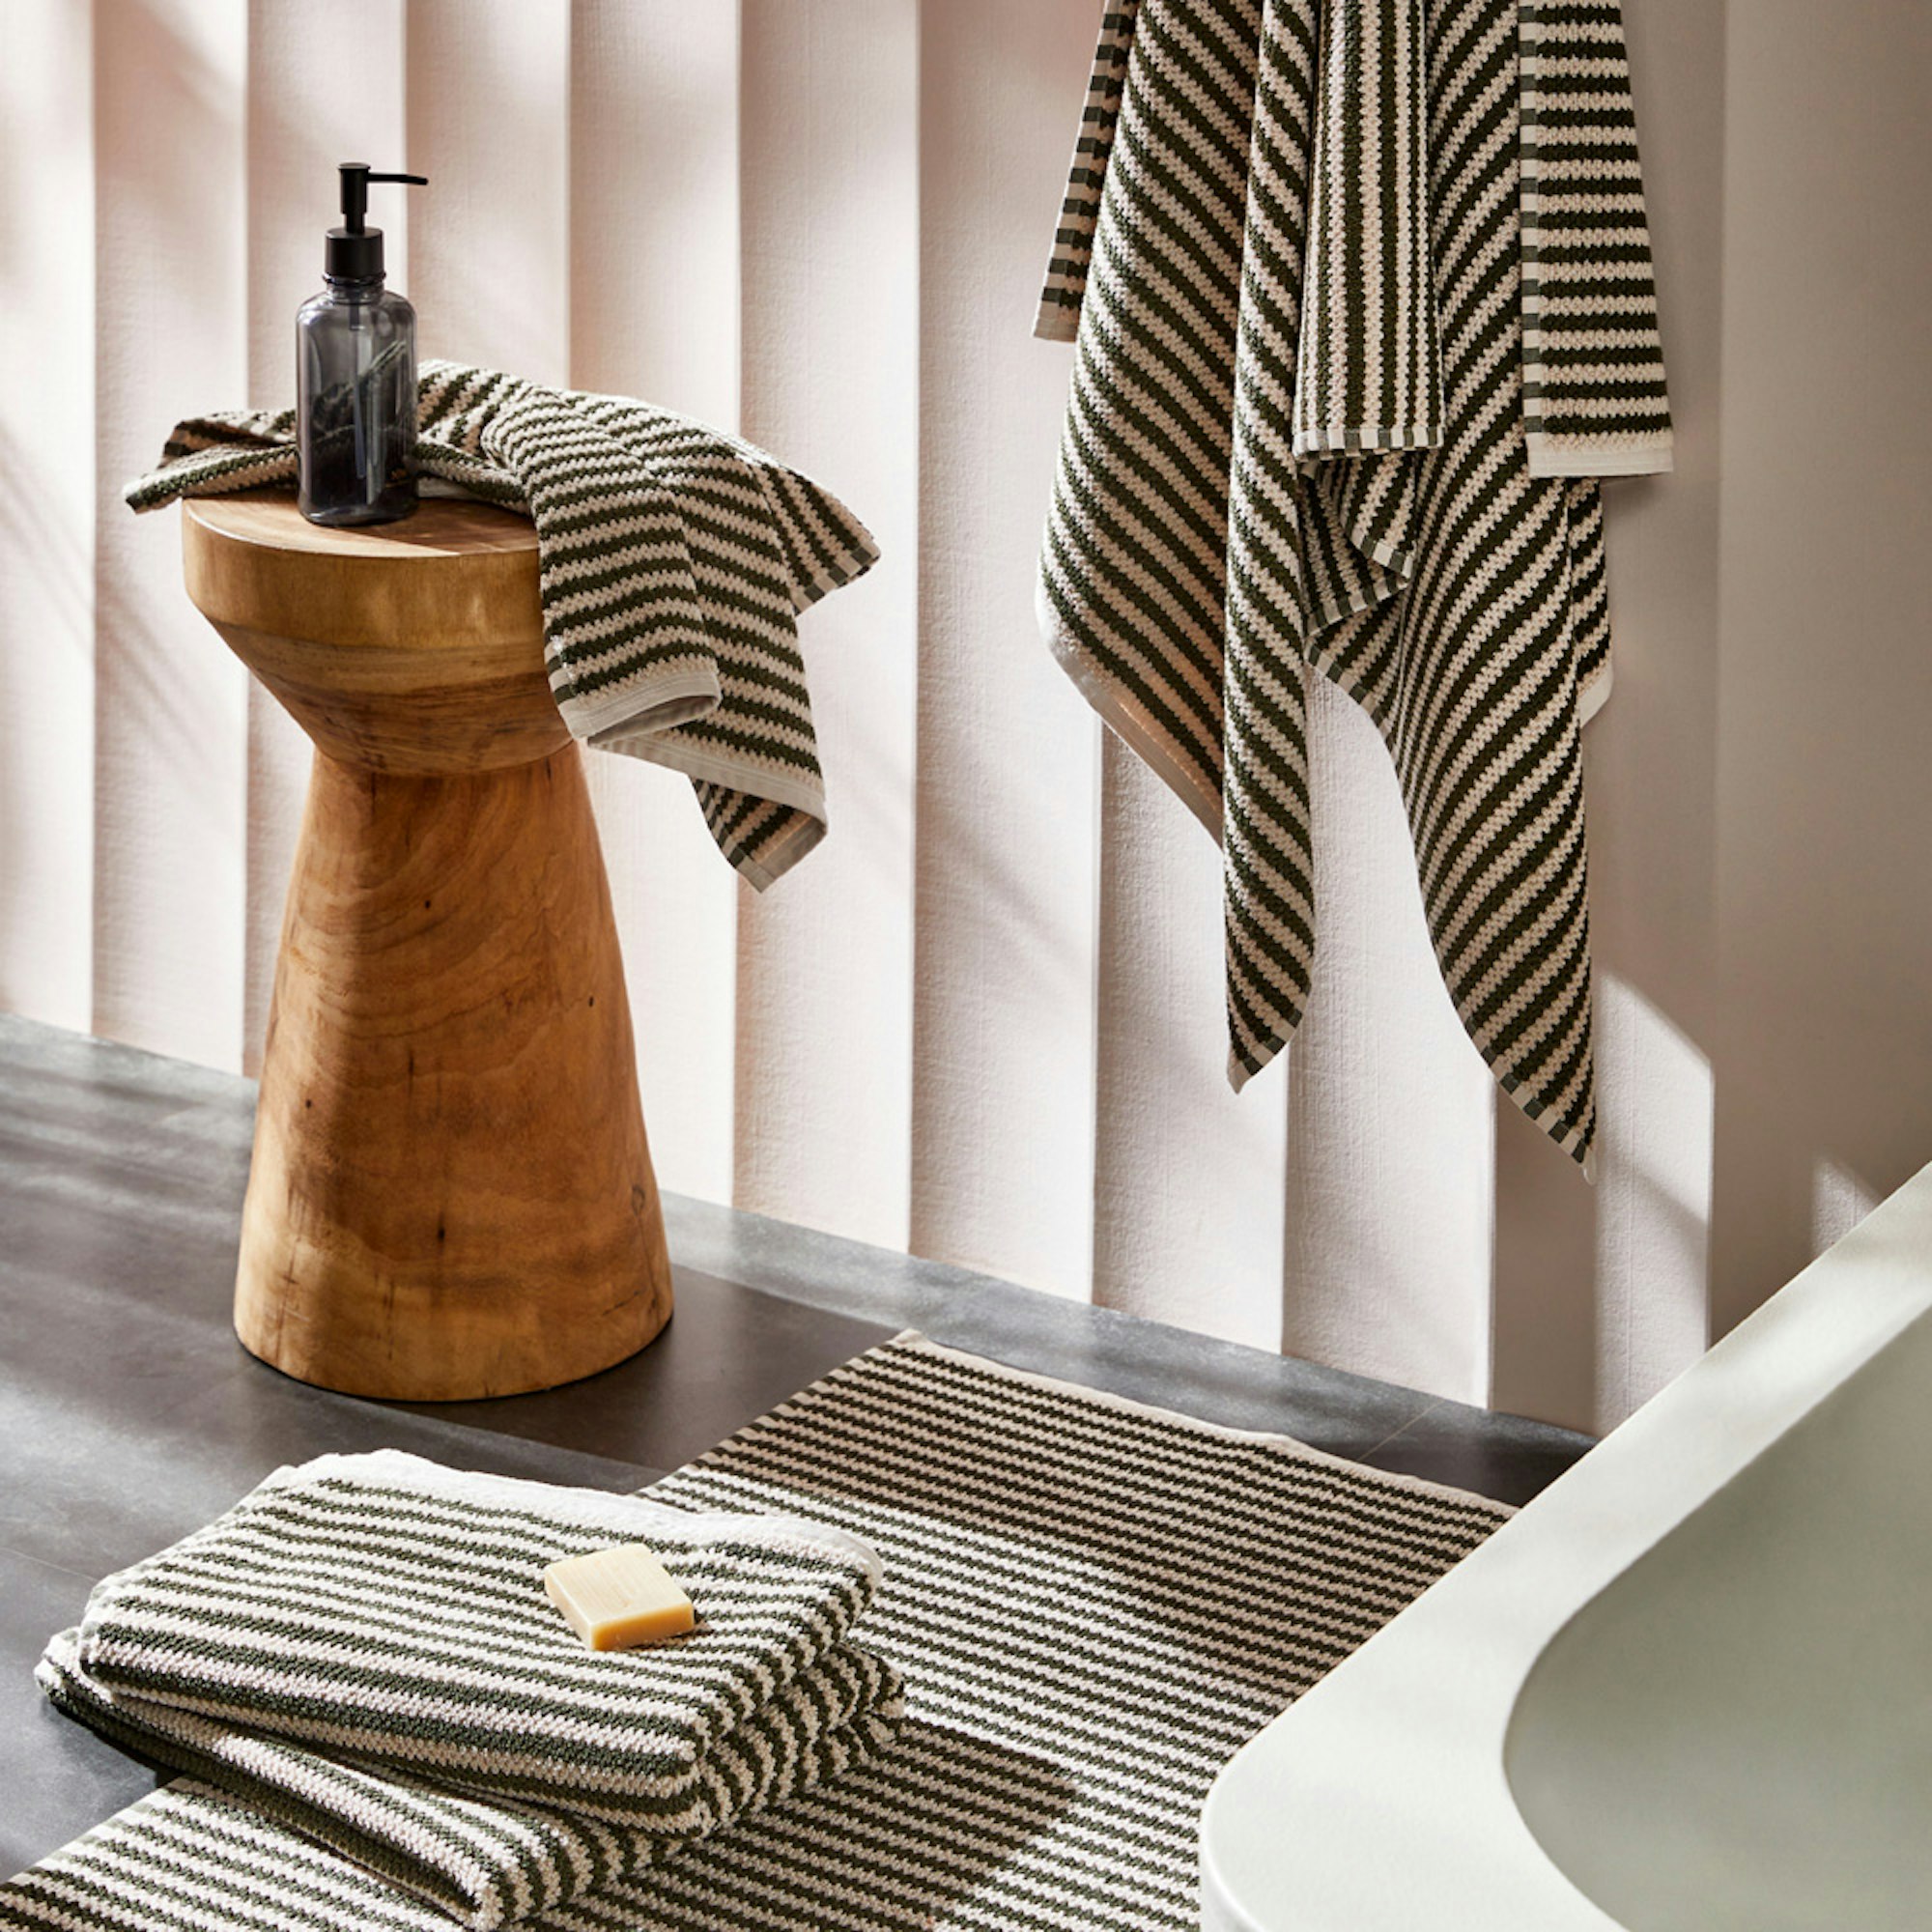 Neale Whitaker SS23 Turkish textured towel collection. Towel collection in green and white stripe in a bathroom setting.